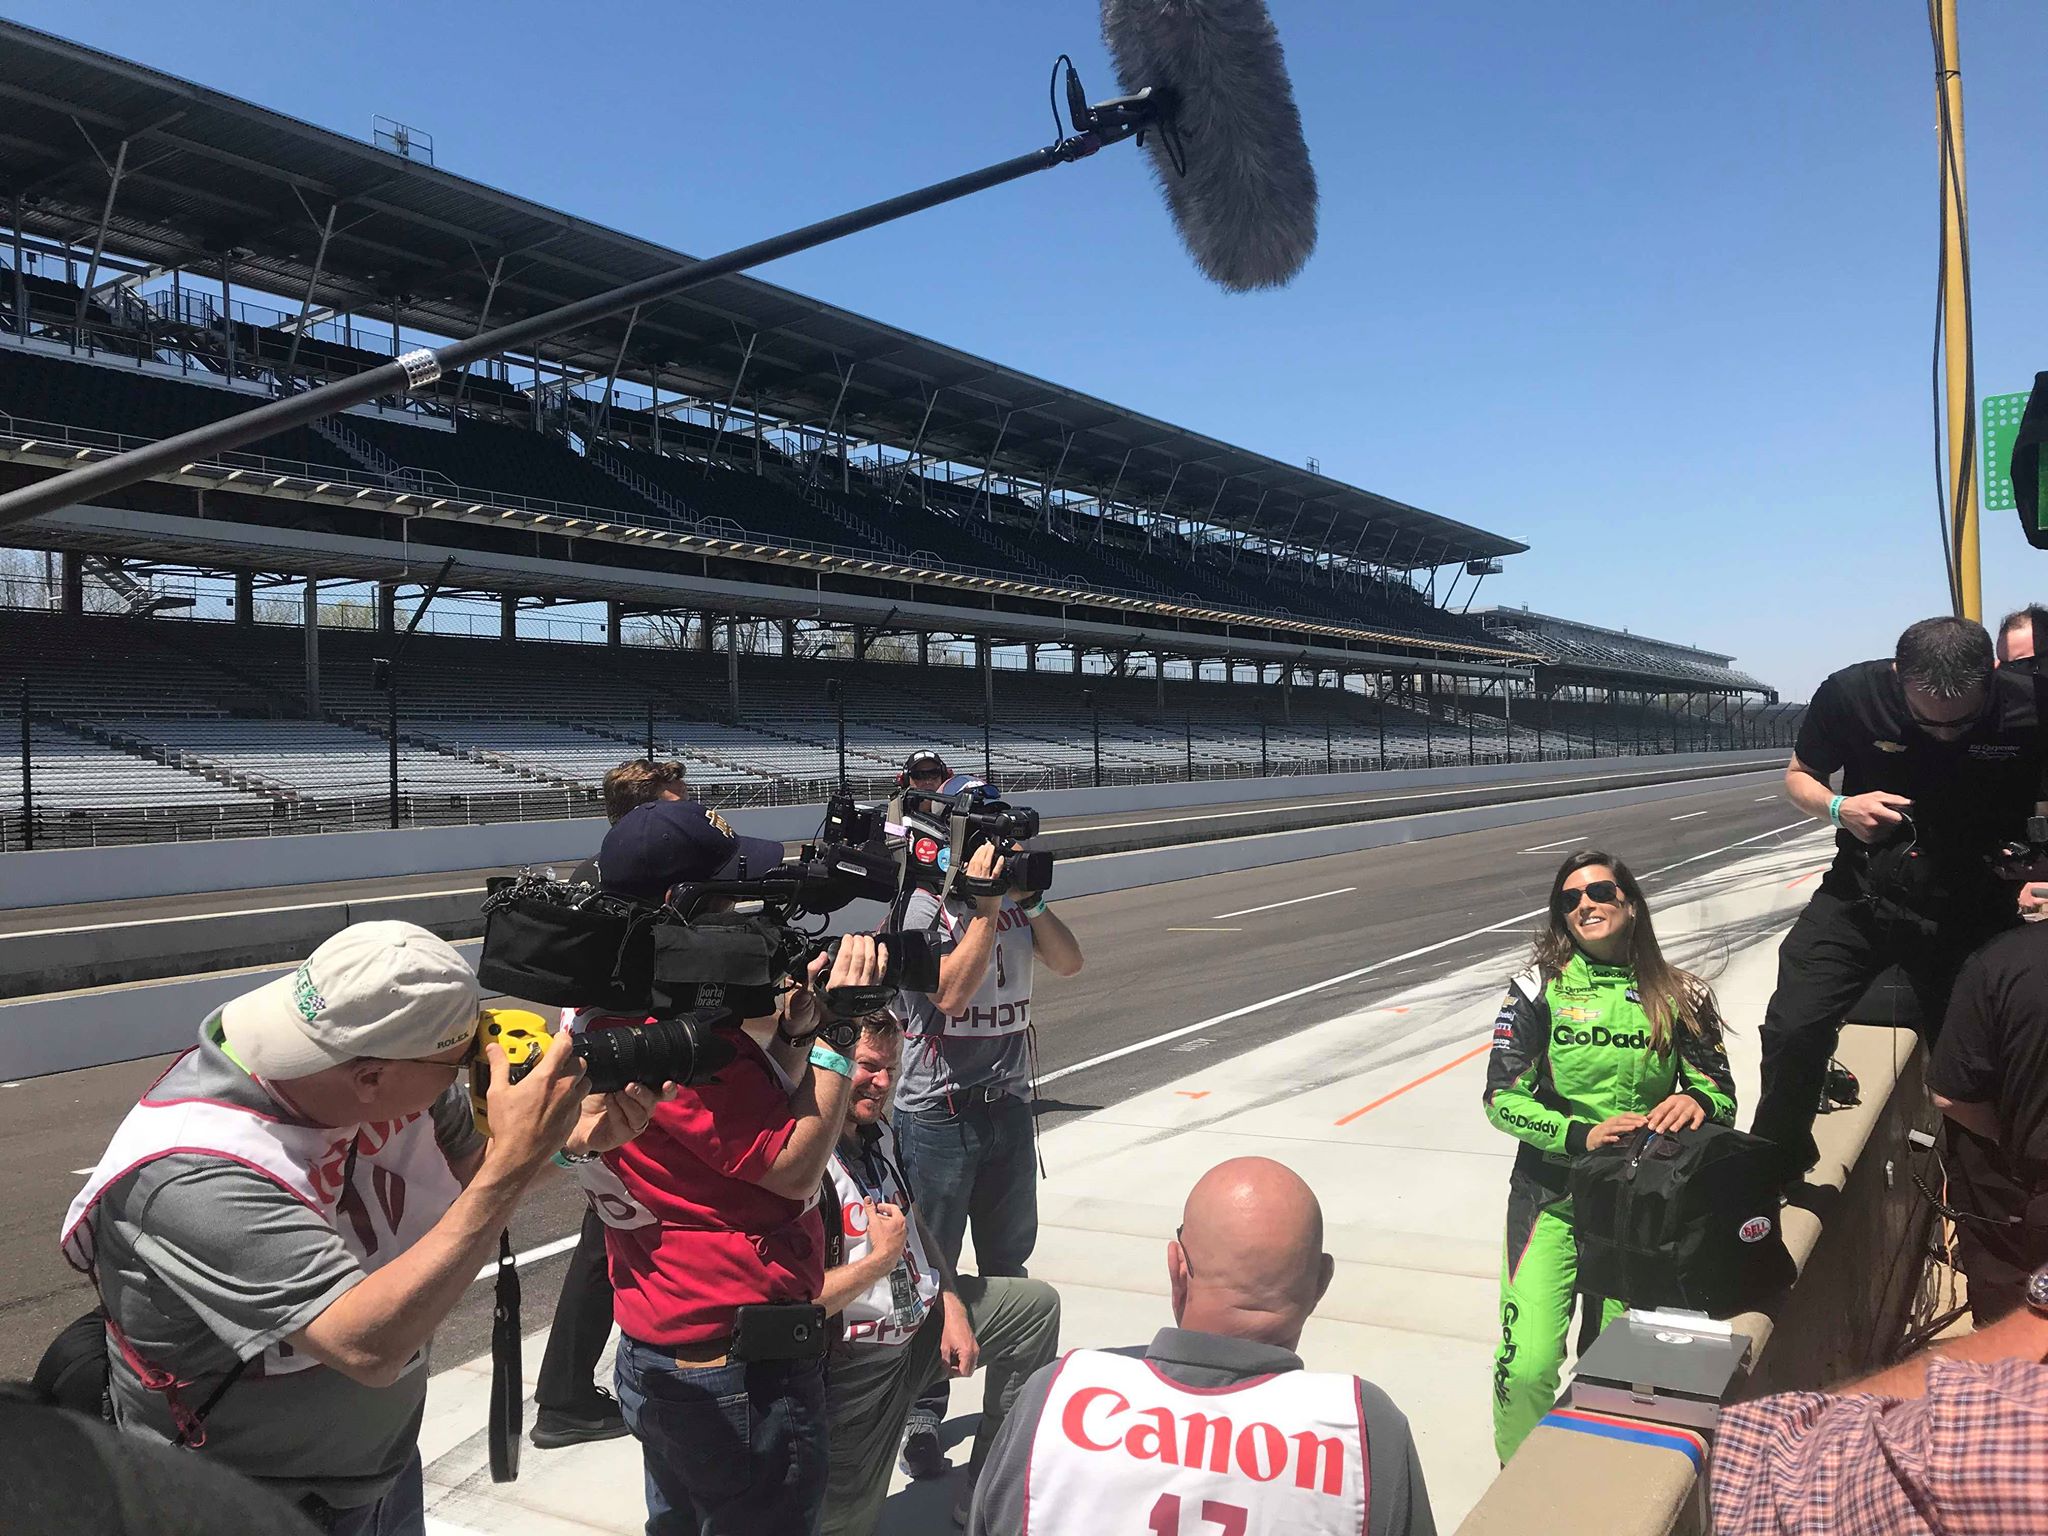 Helio Castroneves Danica Patrick looking to add to historic resumes at IMS Pit